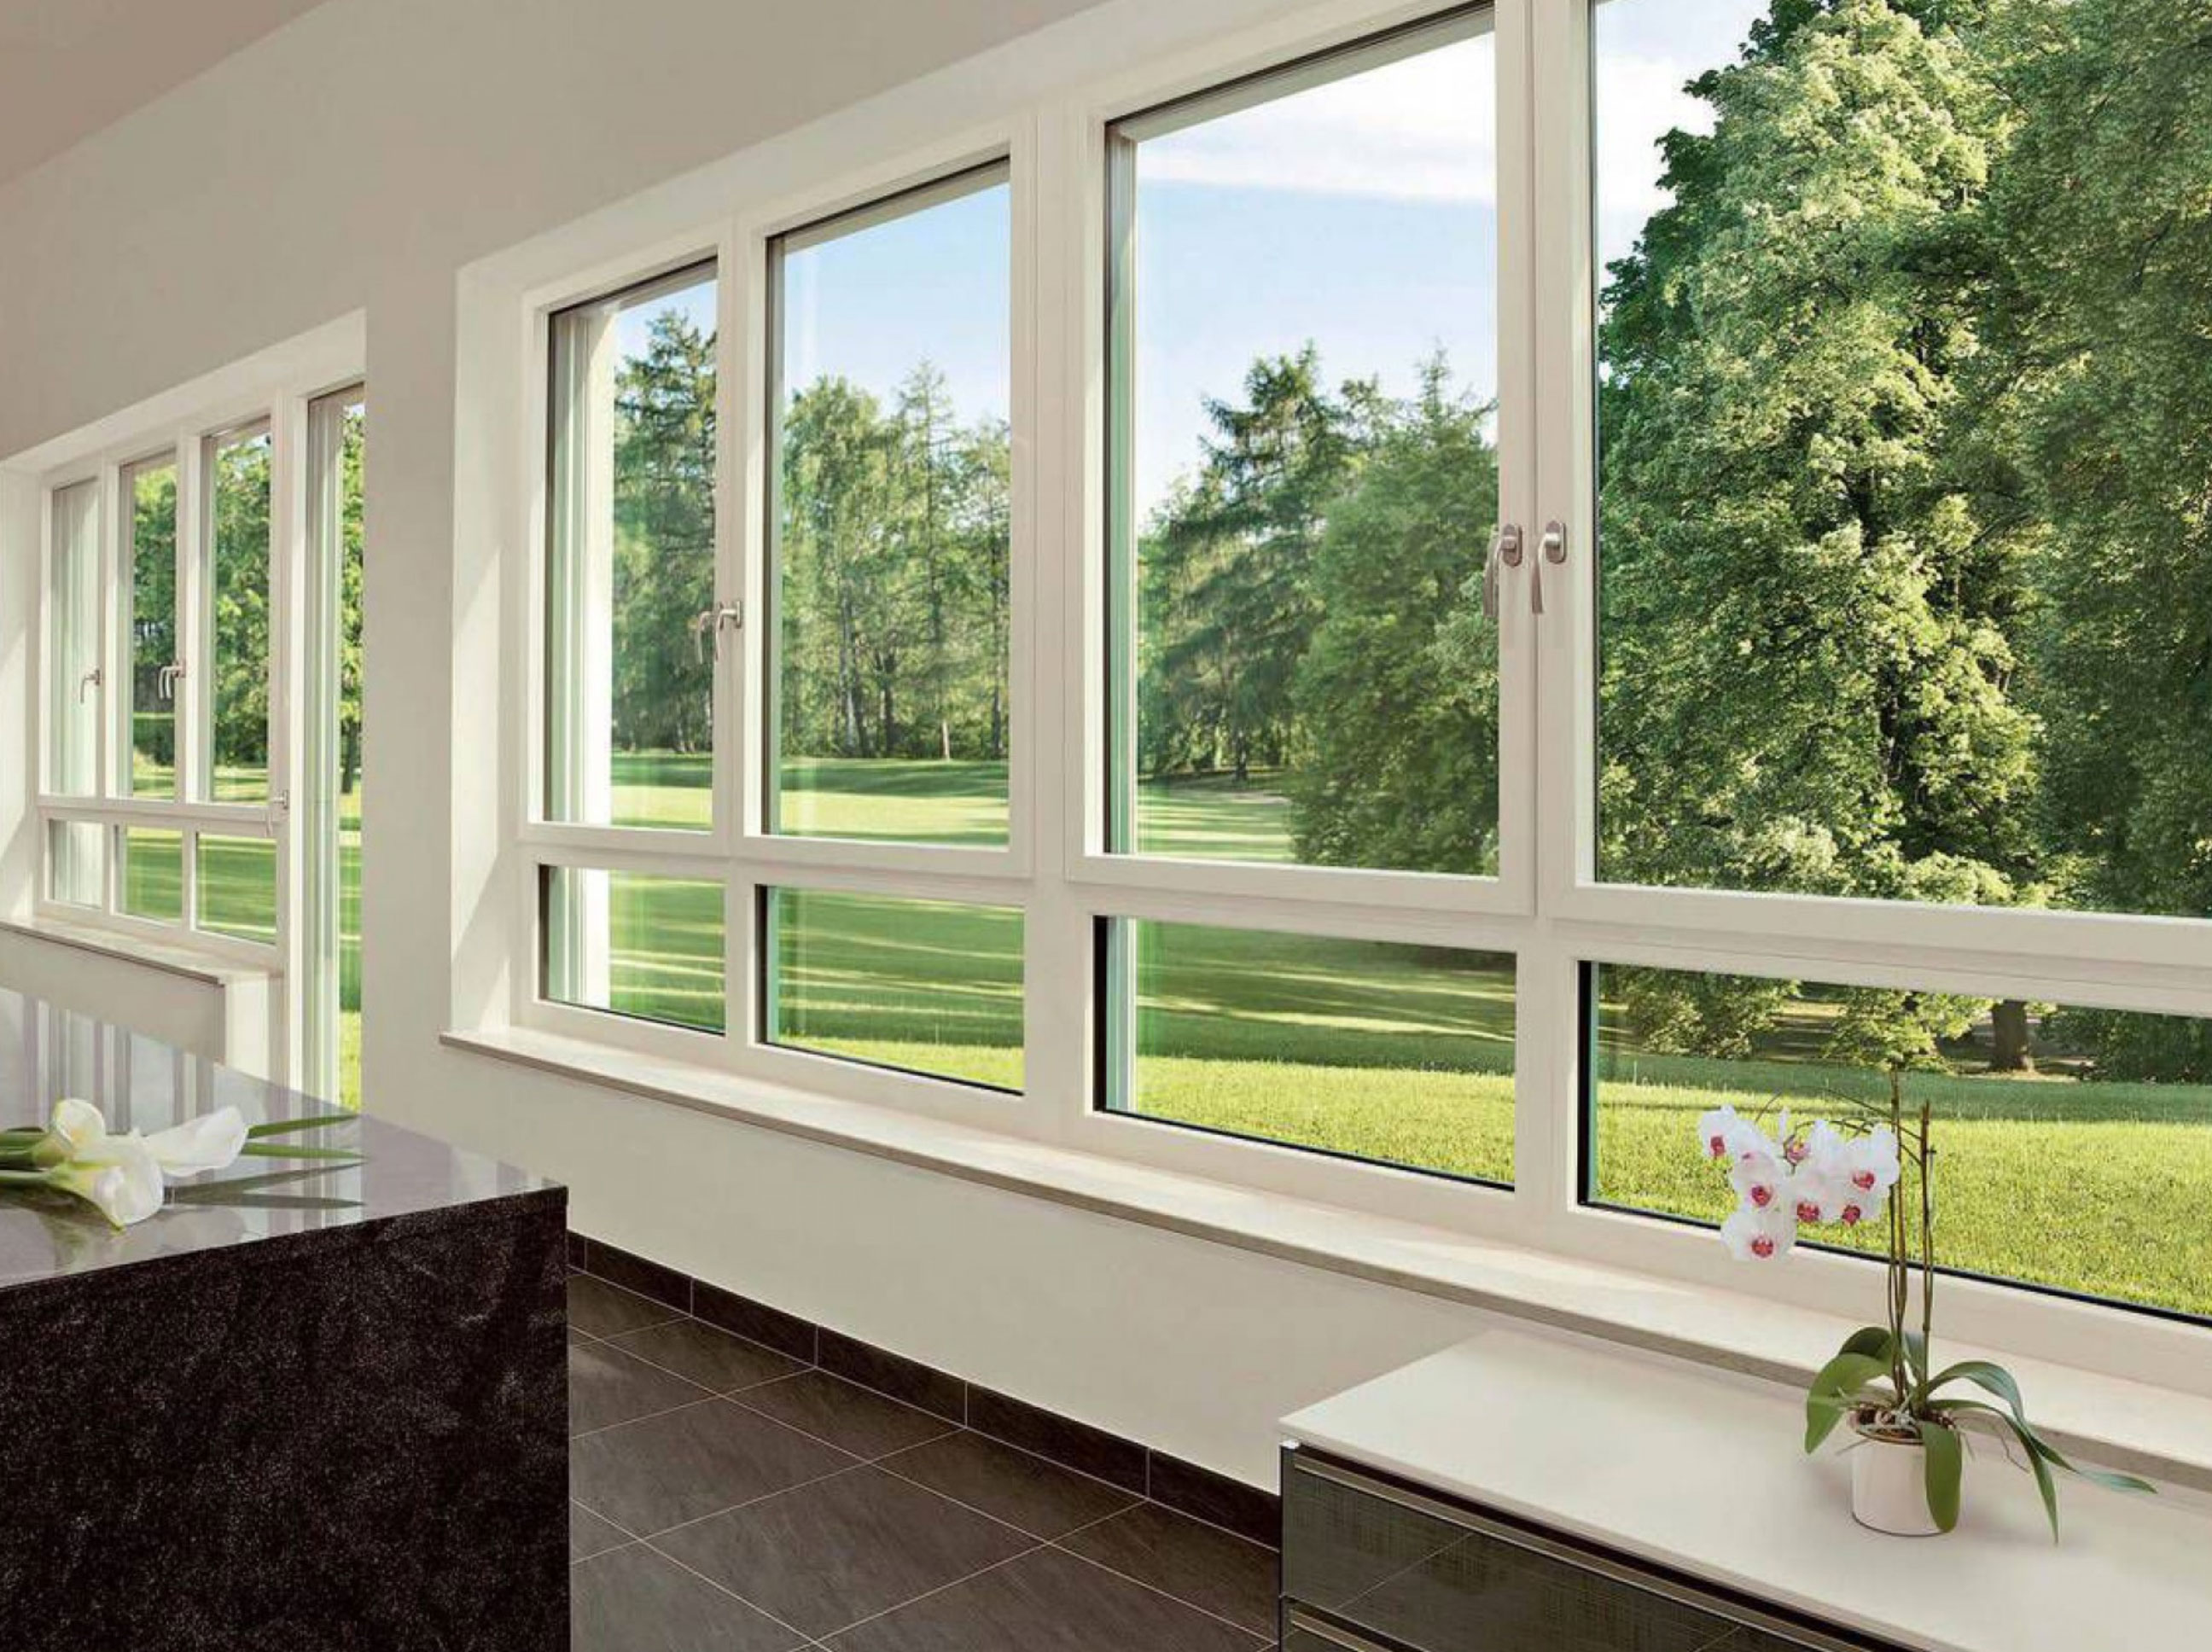 PVC windows are an integral part of any modern building